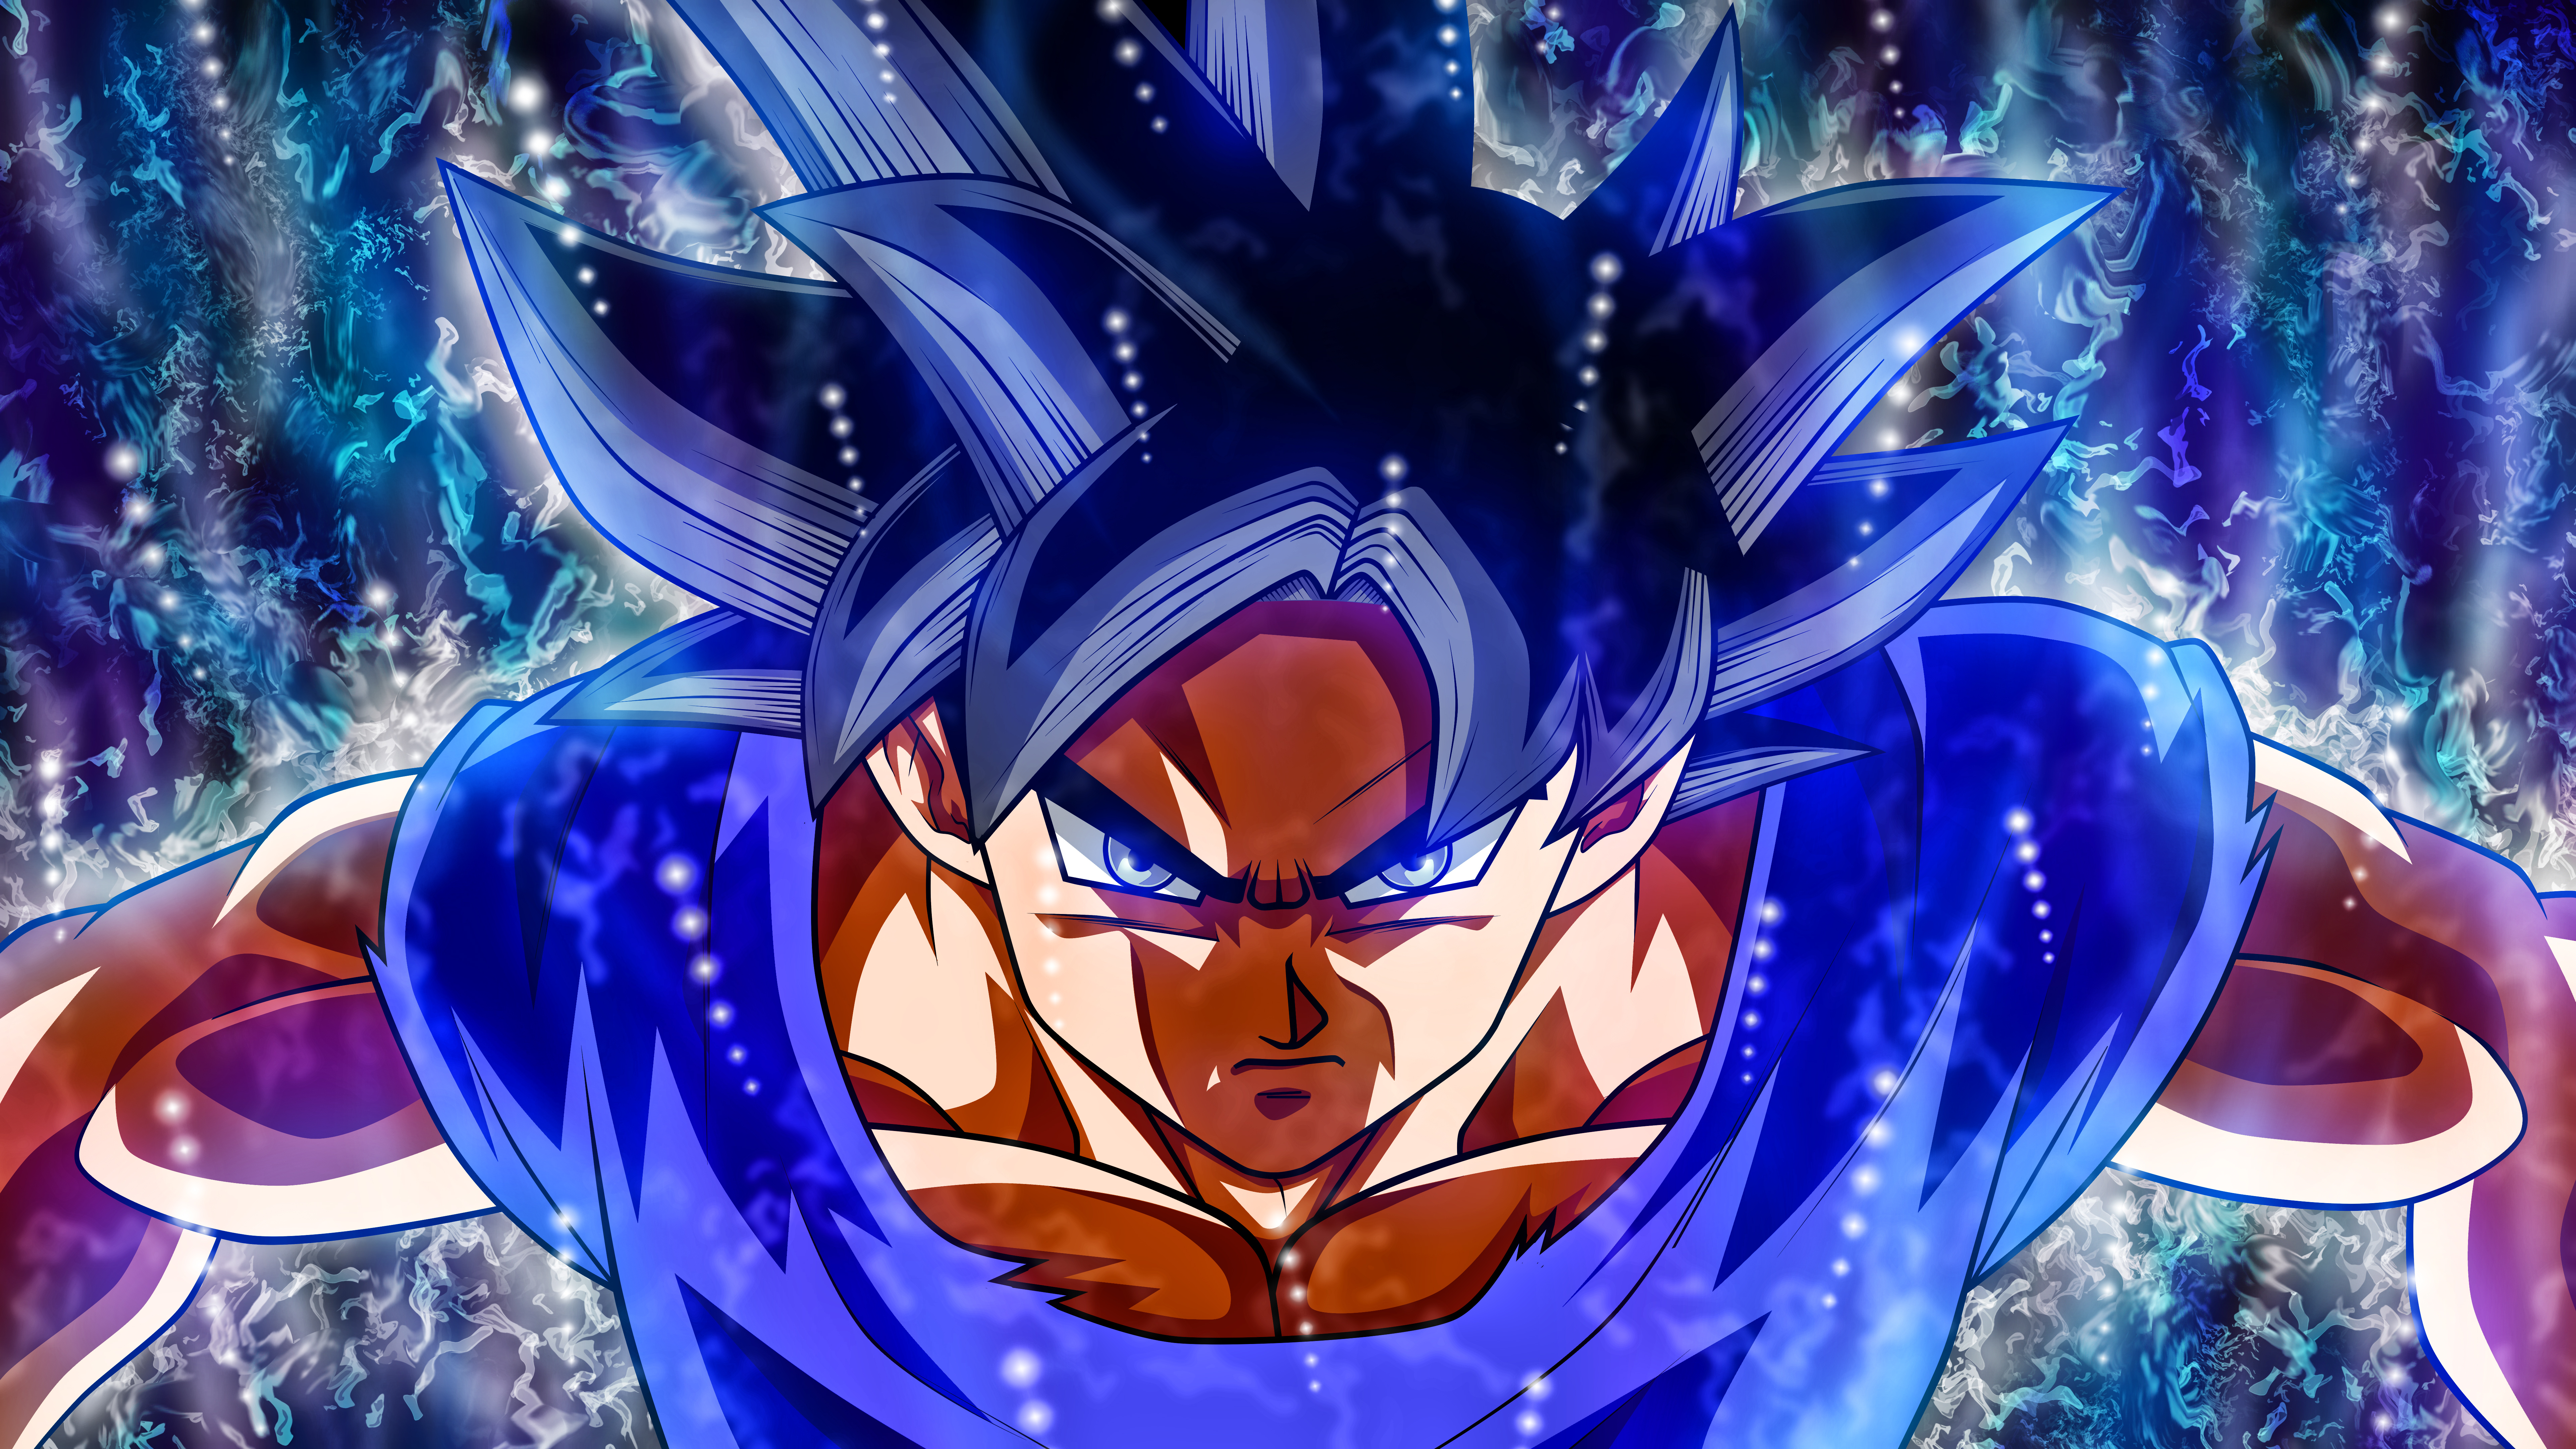 Wallpaper Yellow and Blue Dragon Ball z Character, Background Free Image